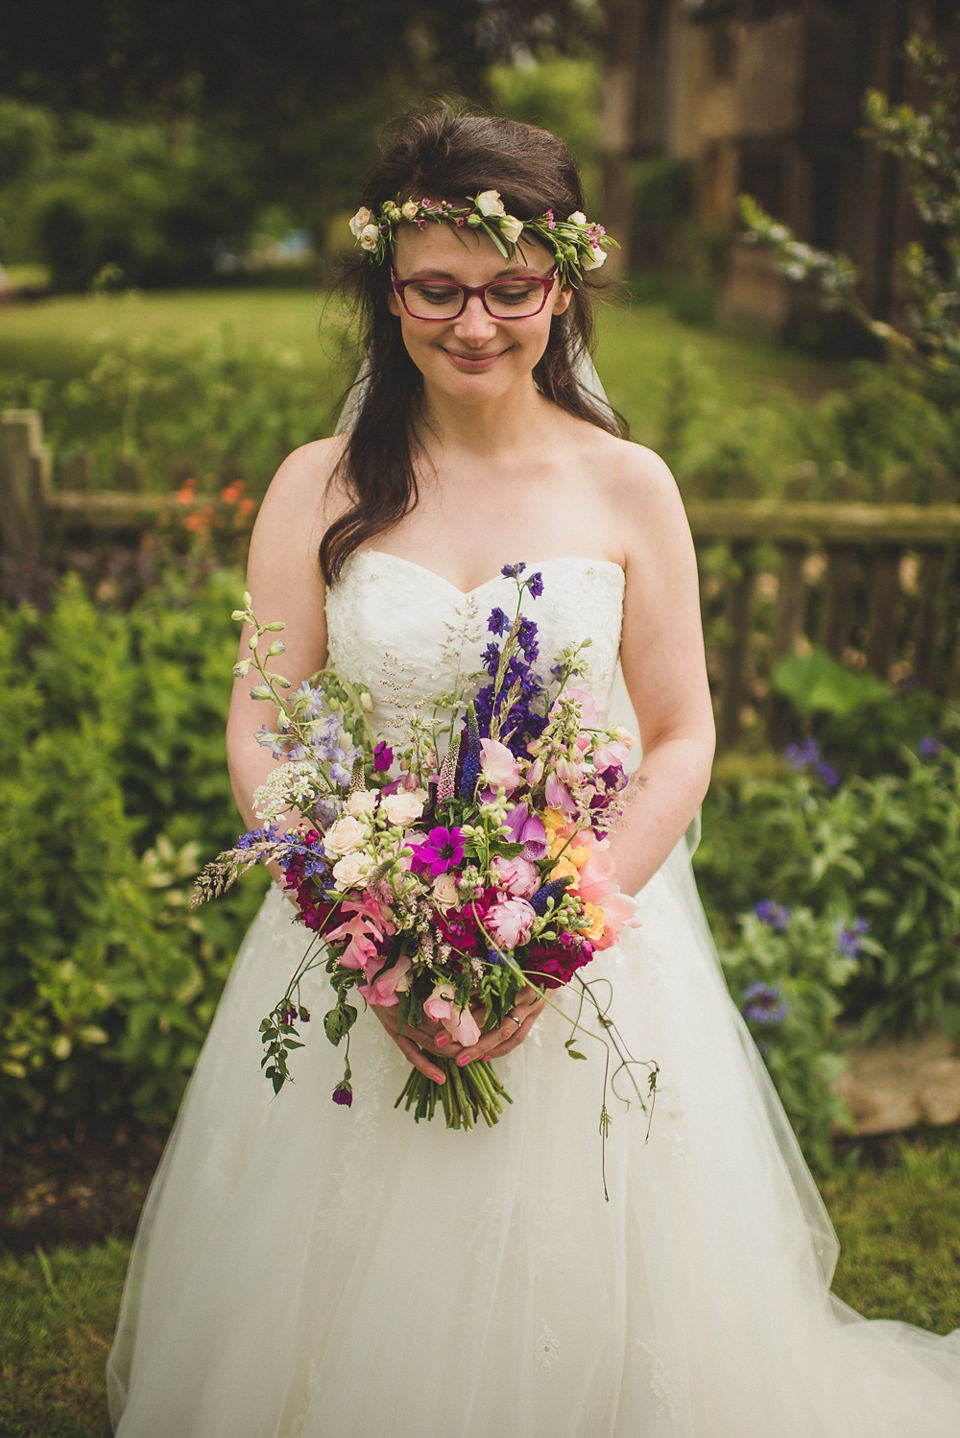 A beautiful bride wearing glasses and an Alfred Angelo gown for her Christian wedding. Photography by Matt Penberthy.